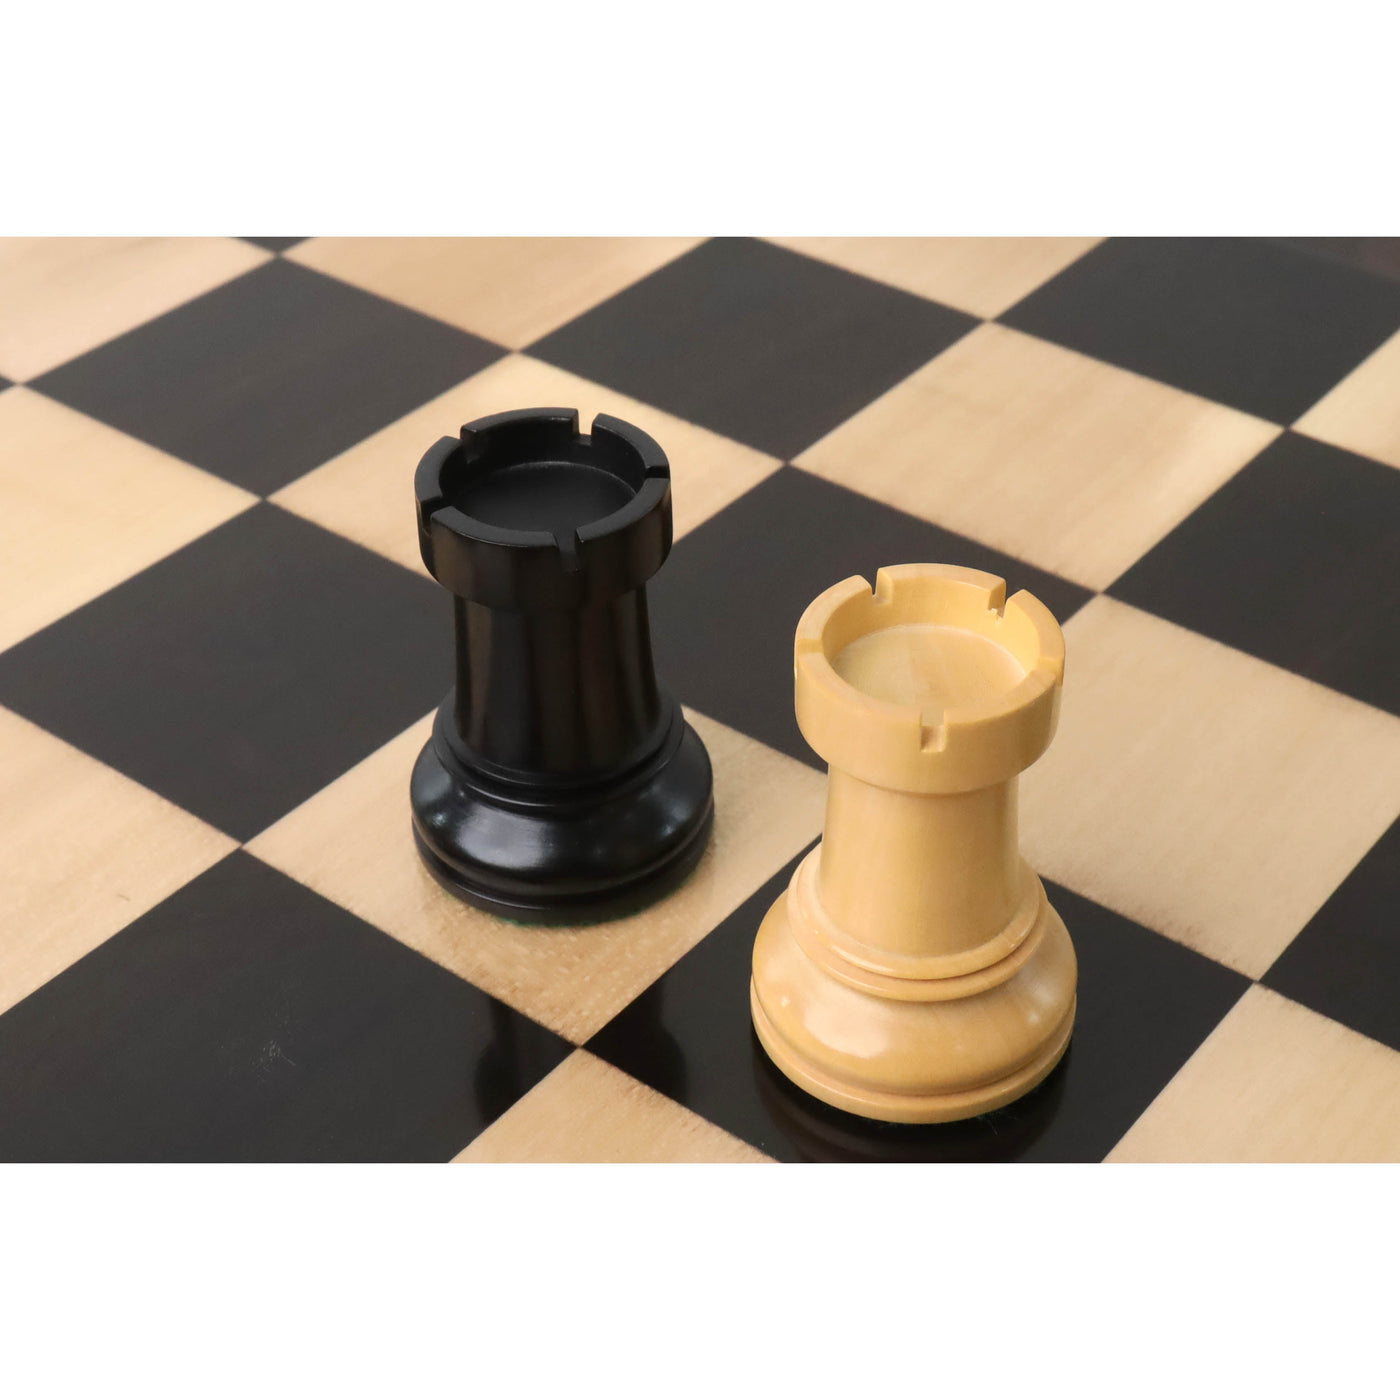 Slightly Imperfect 1950s' Fischer Dubrovnik Chess Set - Chess Pieces Only - Ebony & Boxwood - 3.8 " King